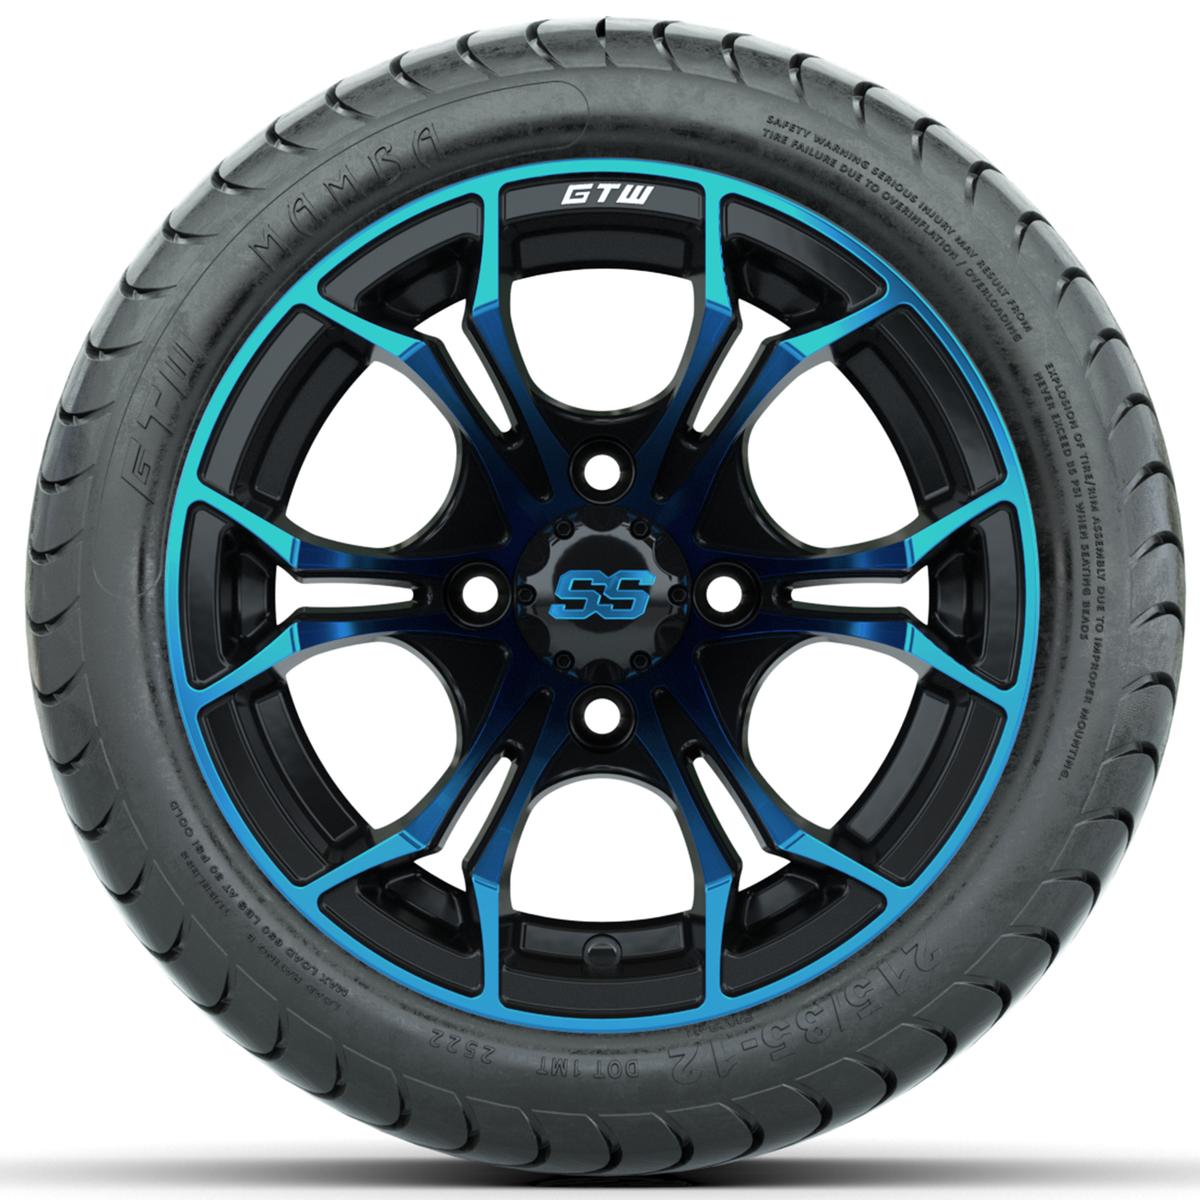 Set of (4) 12 in GTW Spyder Wheels with 215/35-12 GTW Mamba Street Tires